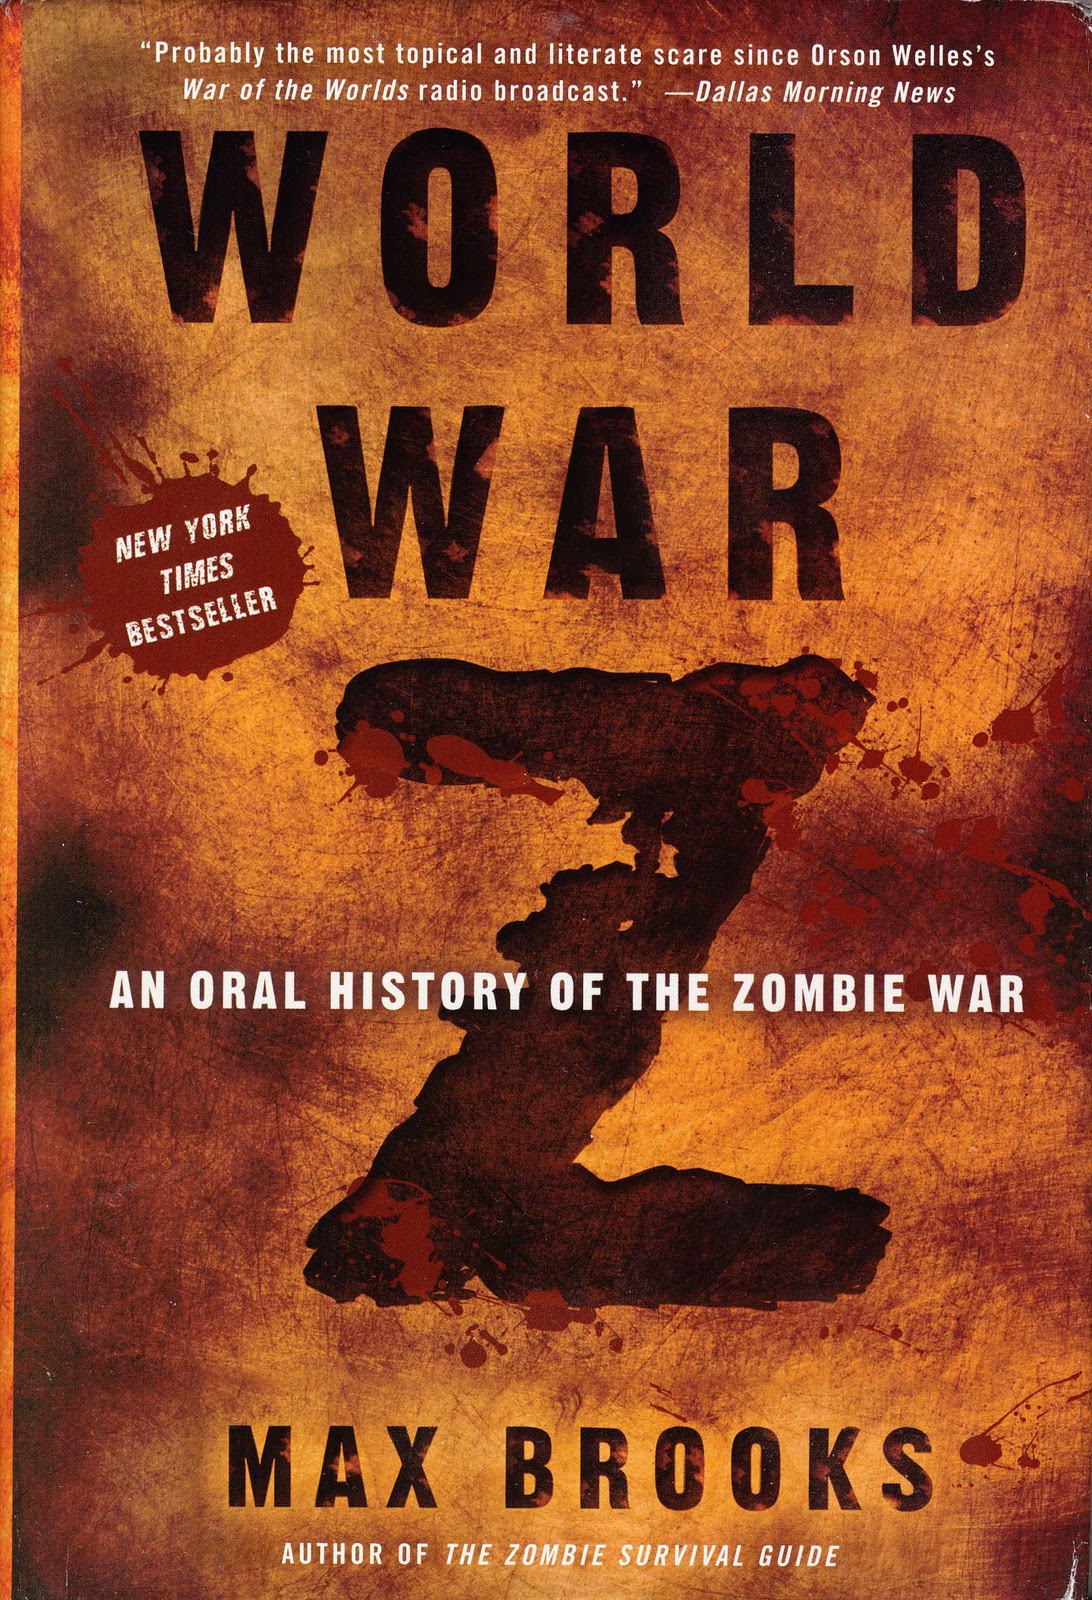 The Max Brooks World War Z book cover.